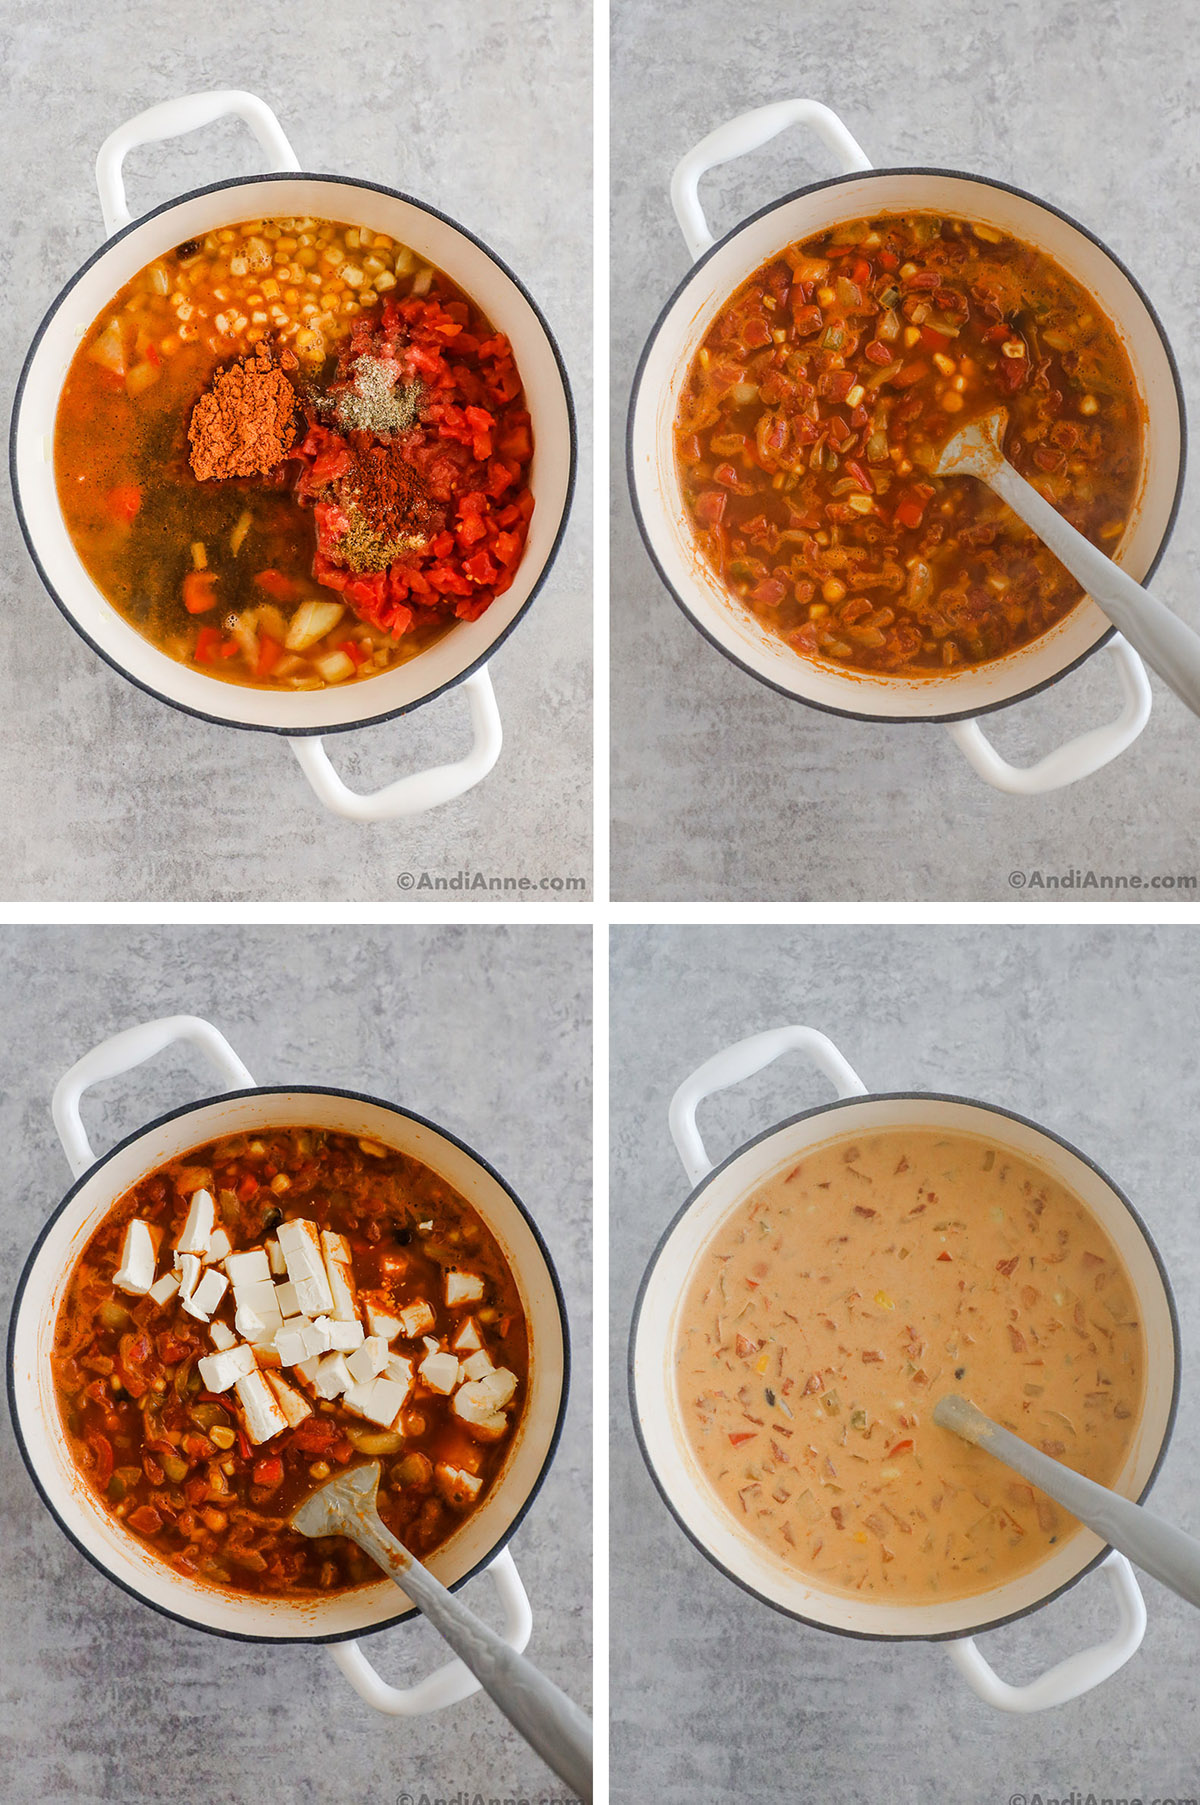 Four images combined. First is various ingredients to make soup all dumped in, but not mixed together. Second is ingredients mixed in pot. Third has cubed cream cheese dumped on top of soup. Fourth is cream cheese melted into the soup in pot.